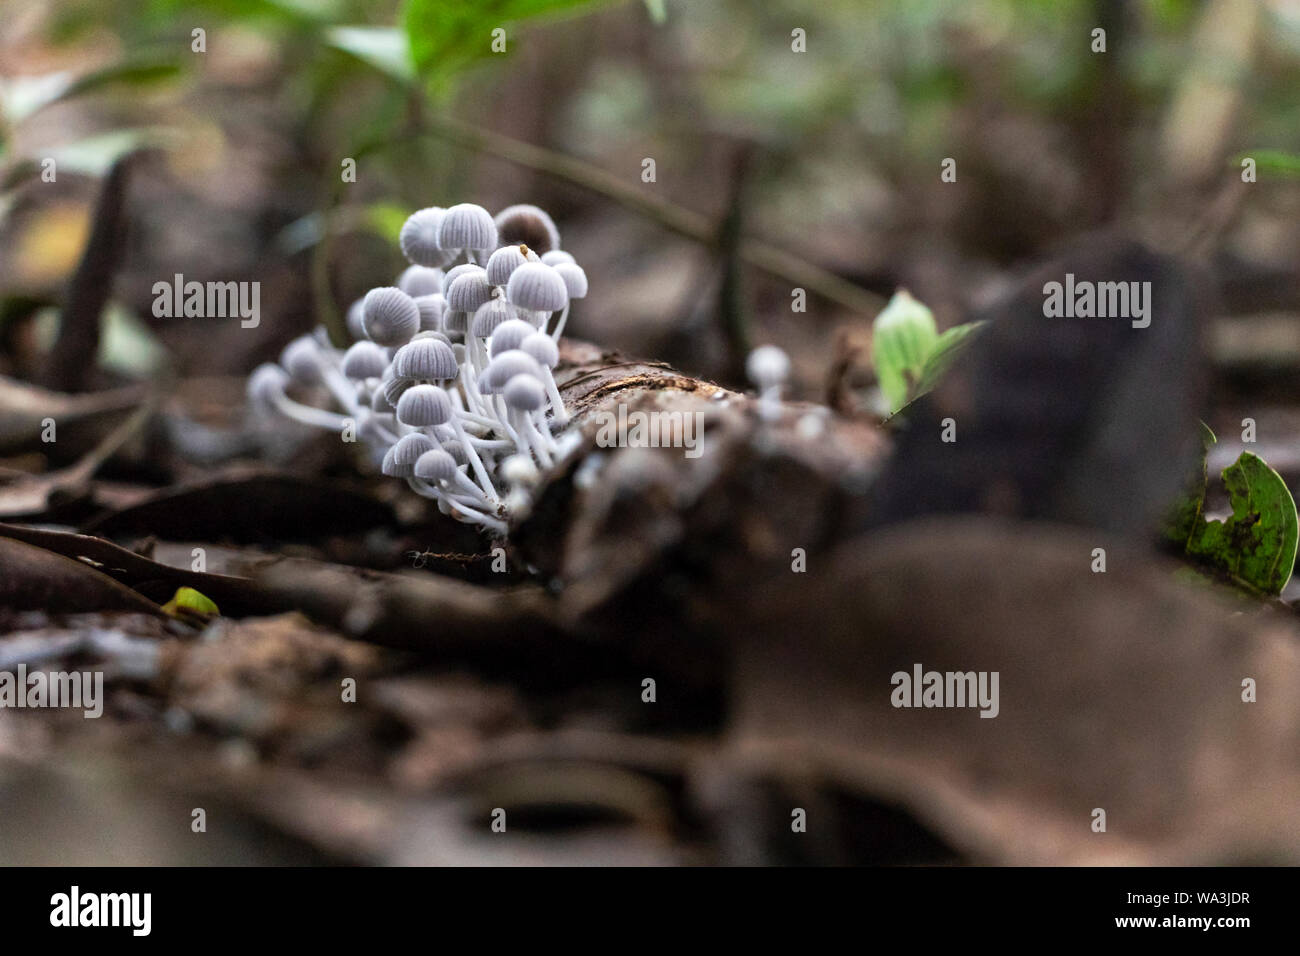 Slightly blurred nature background : Mushrooms in the Amazonian jungles, South America Stock Photo